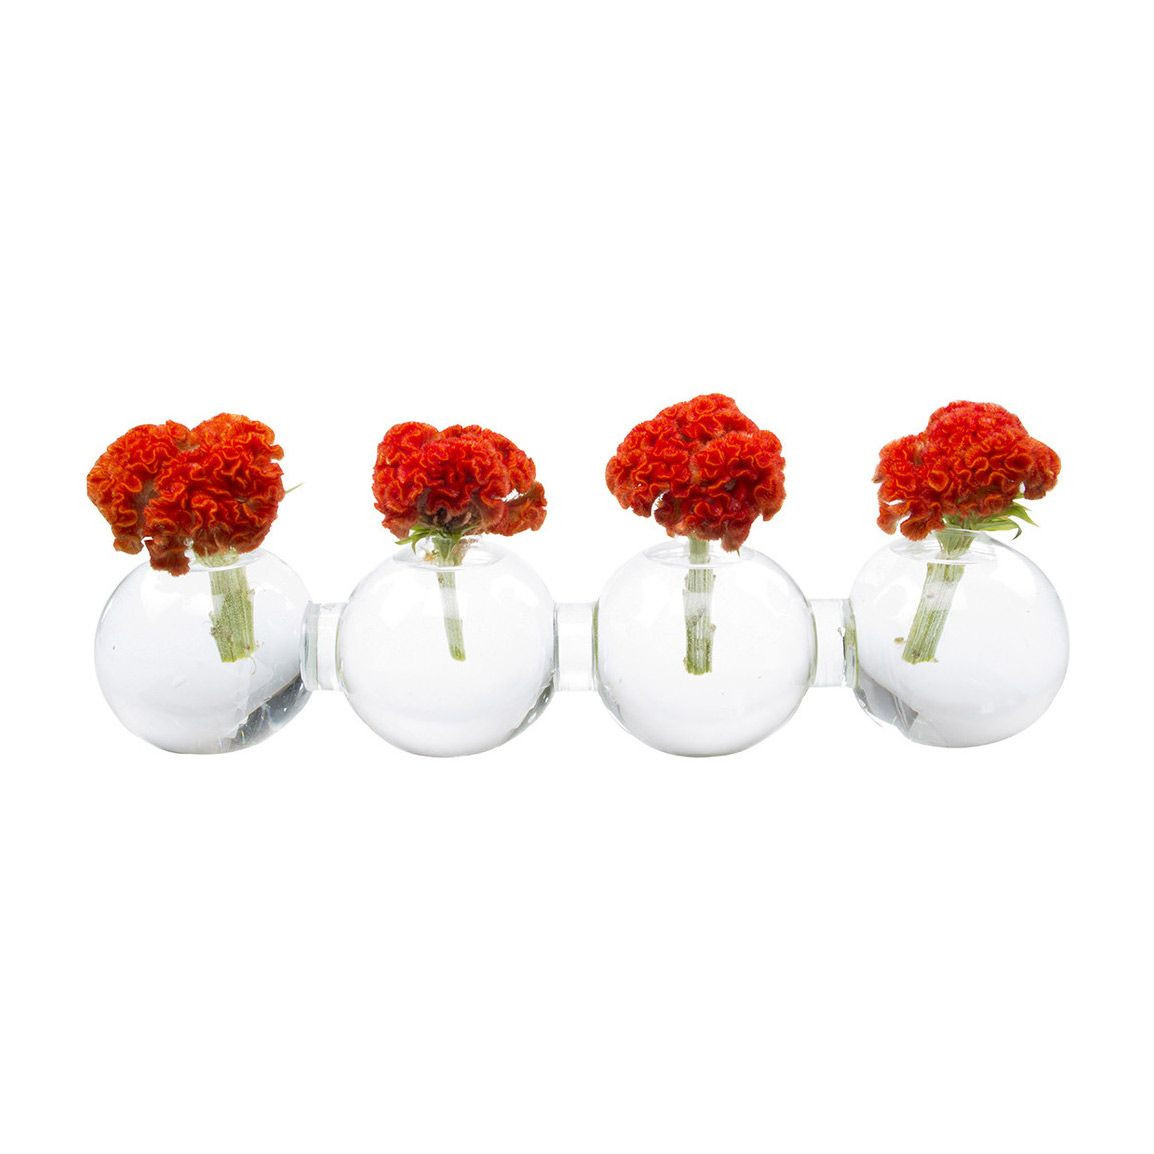 10 Trendy Caterpillar Bud Vase 2024 free download caterpillar bud vase of sporting a fashionable apothecary look this innovative vase throughout explore flowers vase glass flowers and more